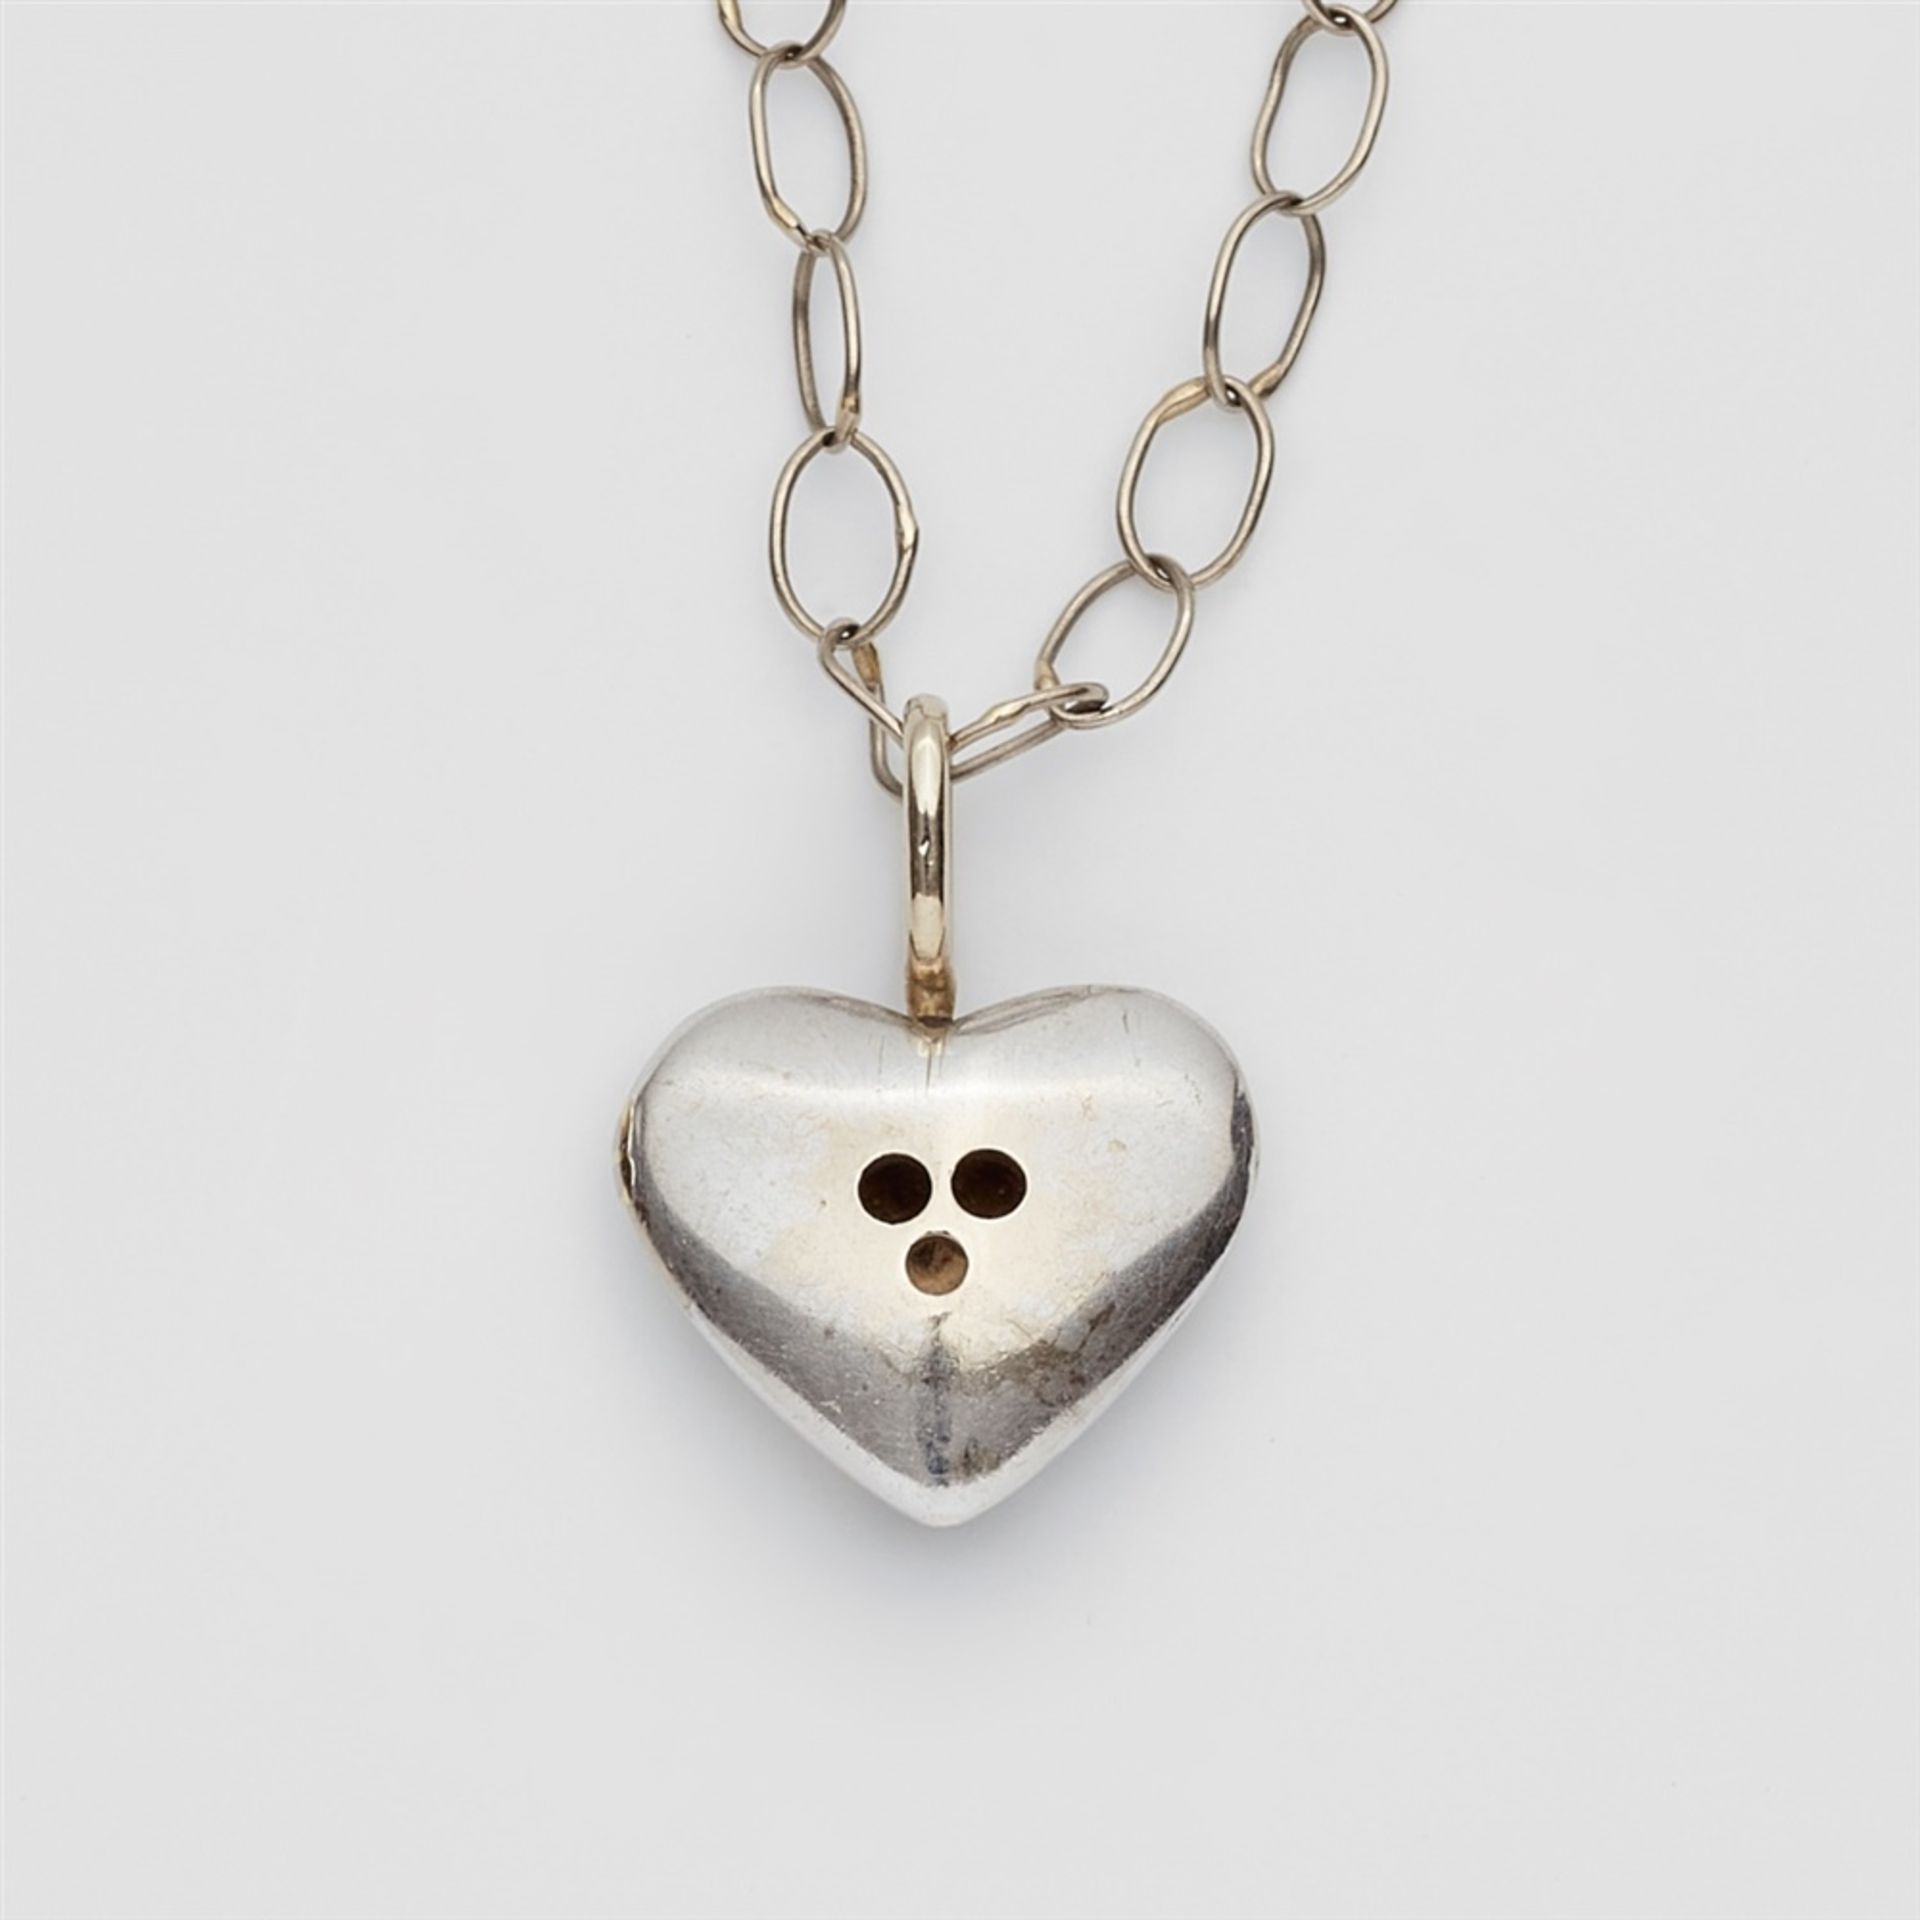 A necklace with a jewelled heart pendantPlatinum chain necklace with a 14k white gold heart-shaped - Bild 2 aus 2